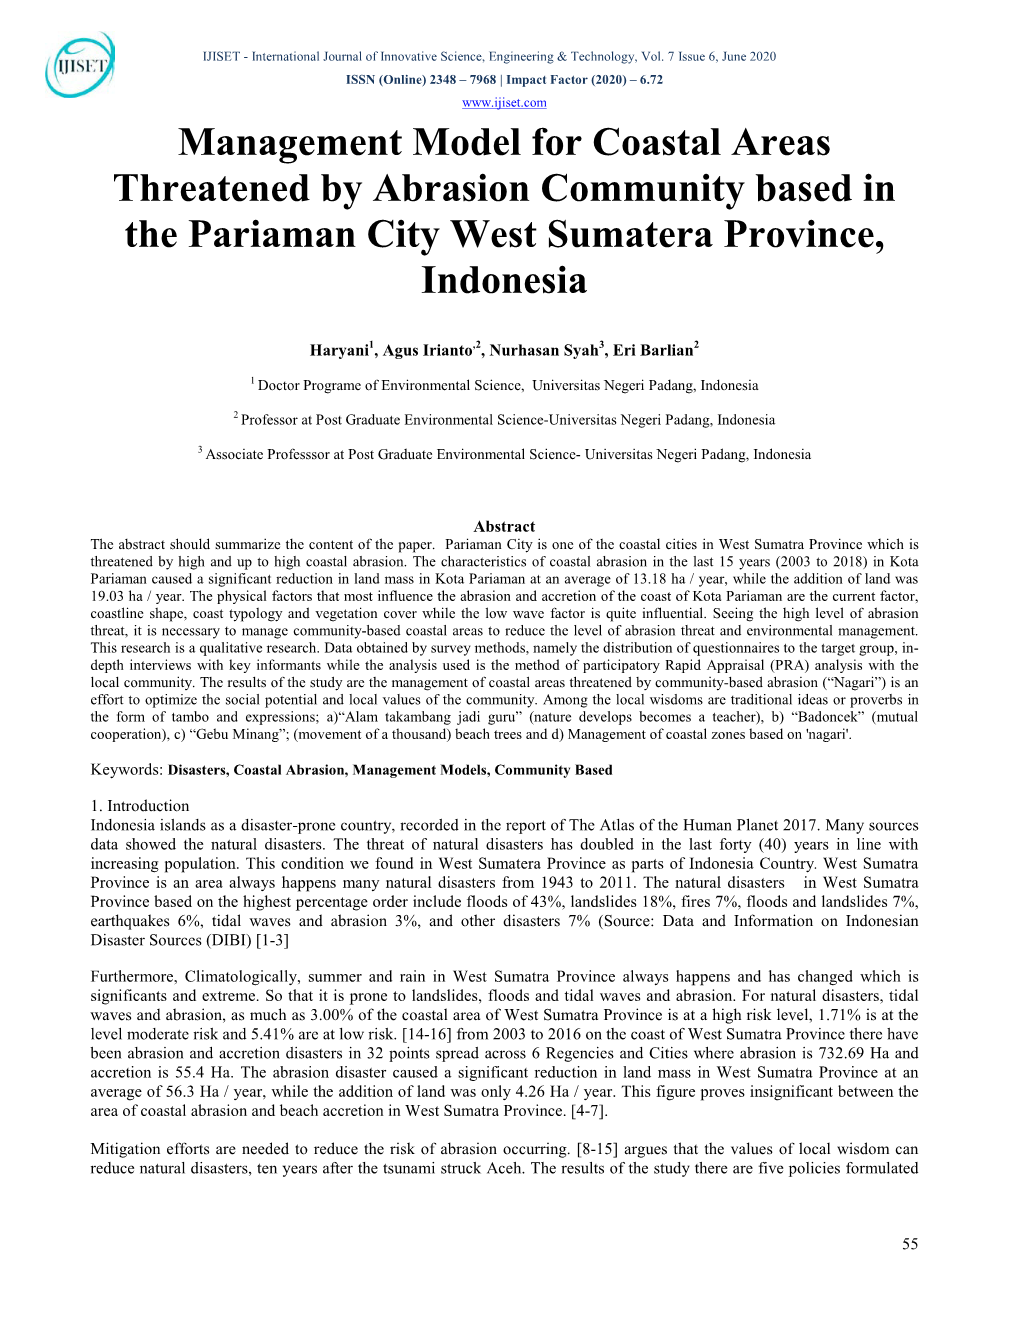 Management Model for Coastal Areas Threatened by Abrasion Community Based in the Pariaman City West Sumatera Province, Indonesia